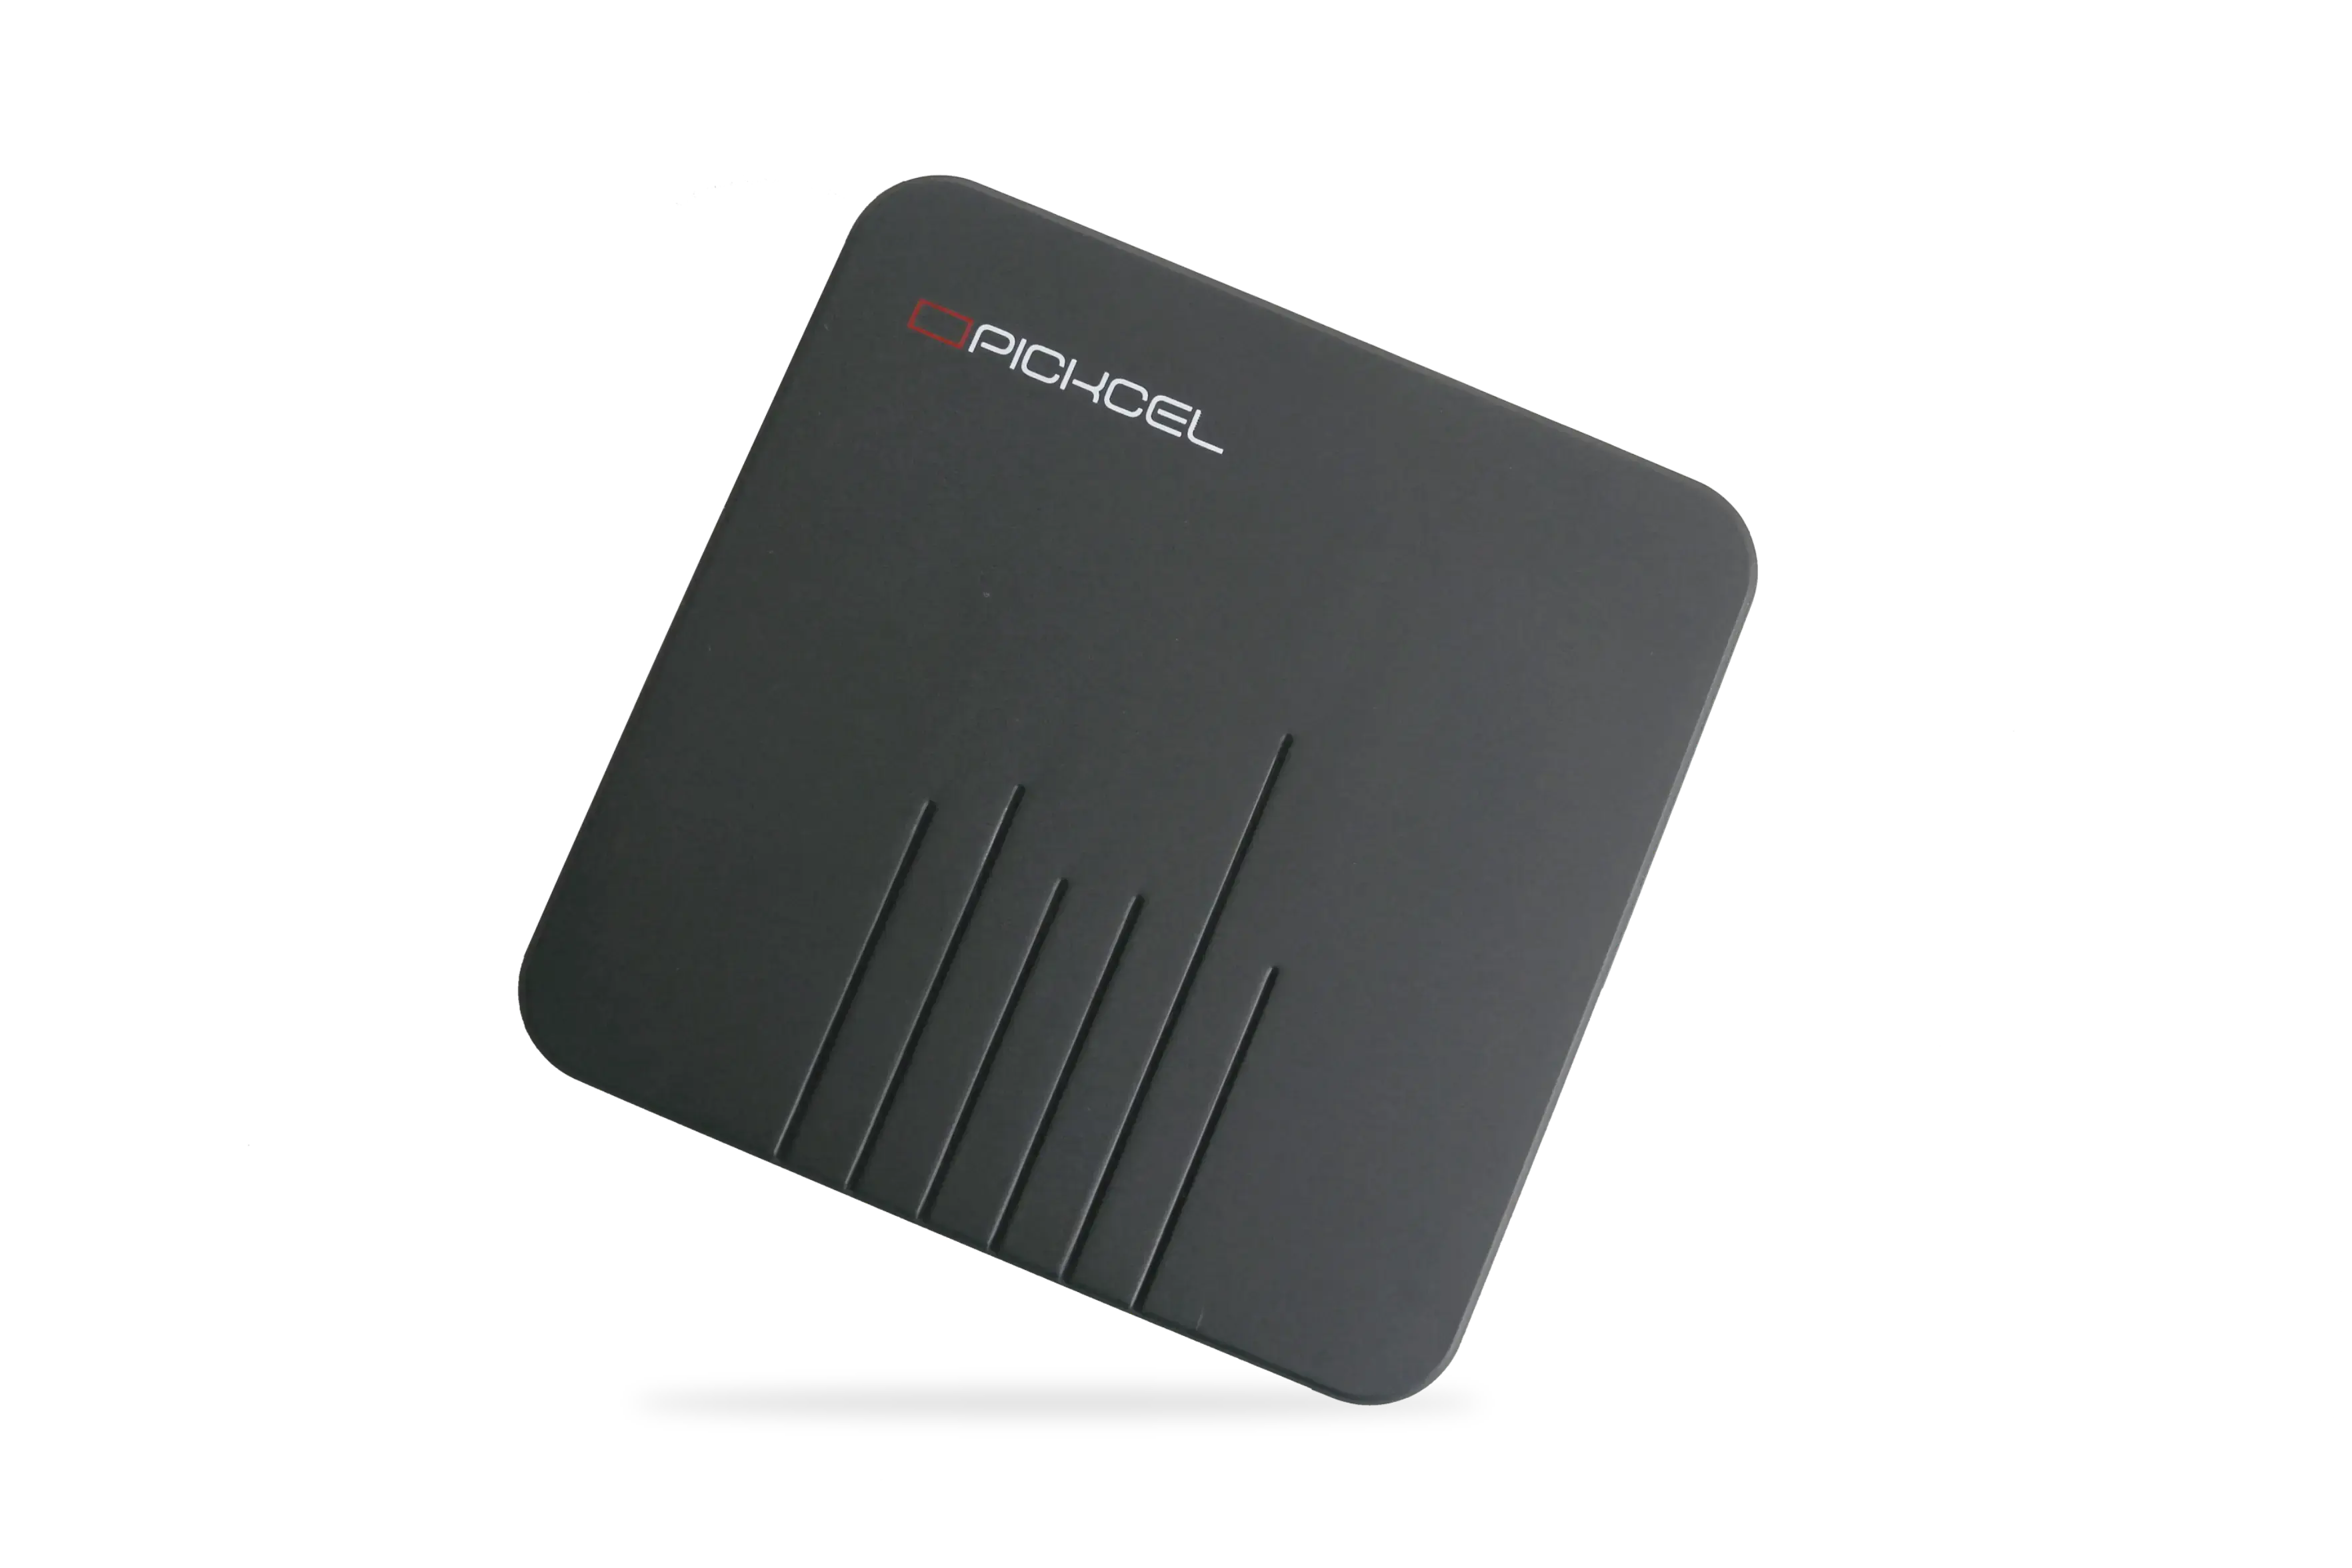 Top view of Pickcel PX300 android media player with Pickcel logo on it